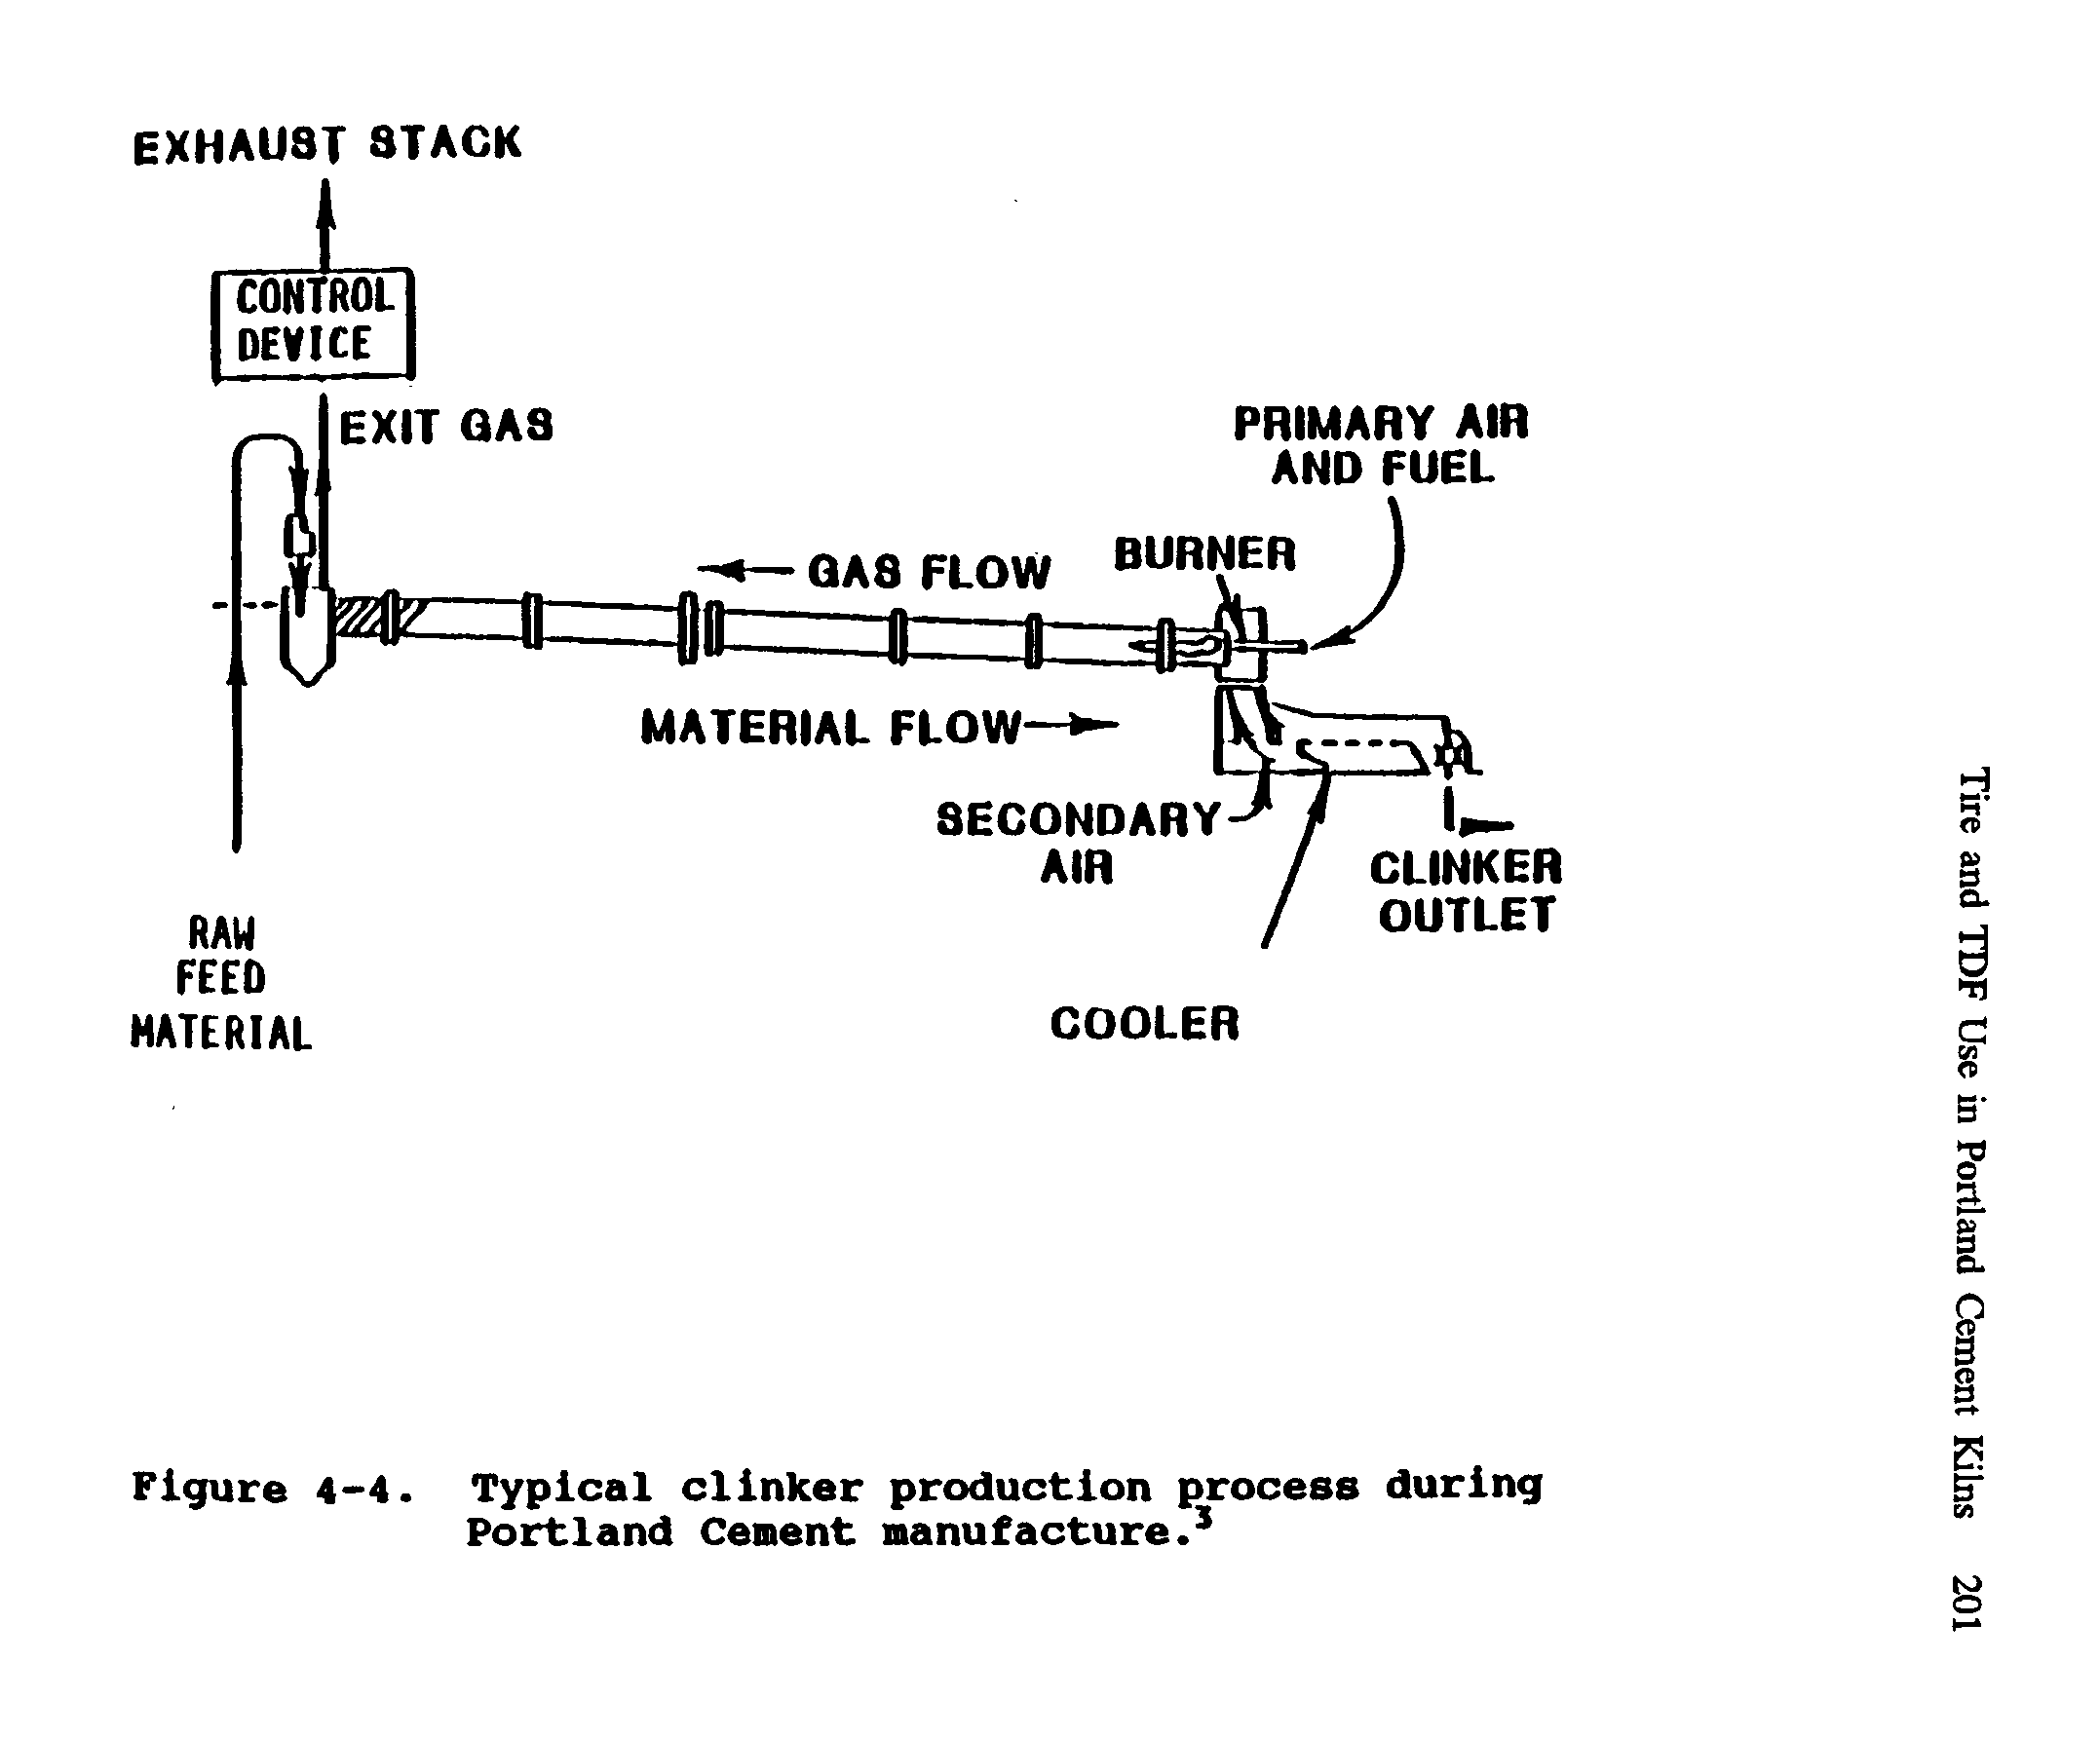 Figure 4-4. Typical clinker production process during Portland Cement manufacture.3...